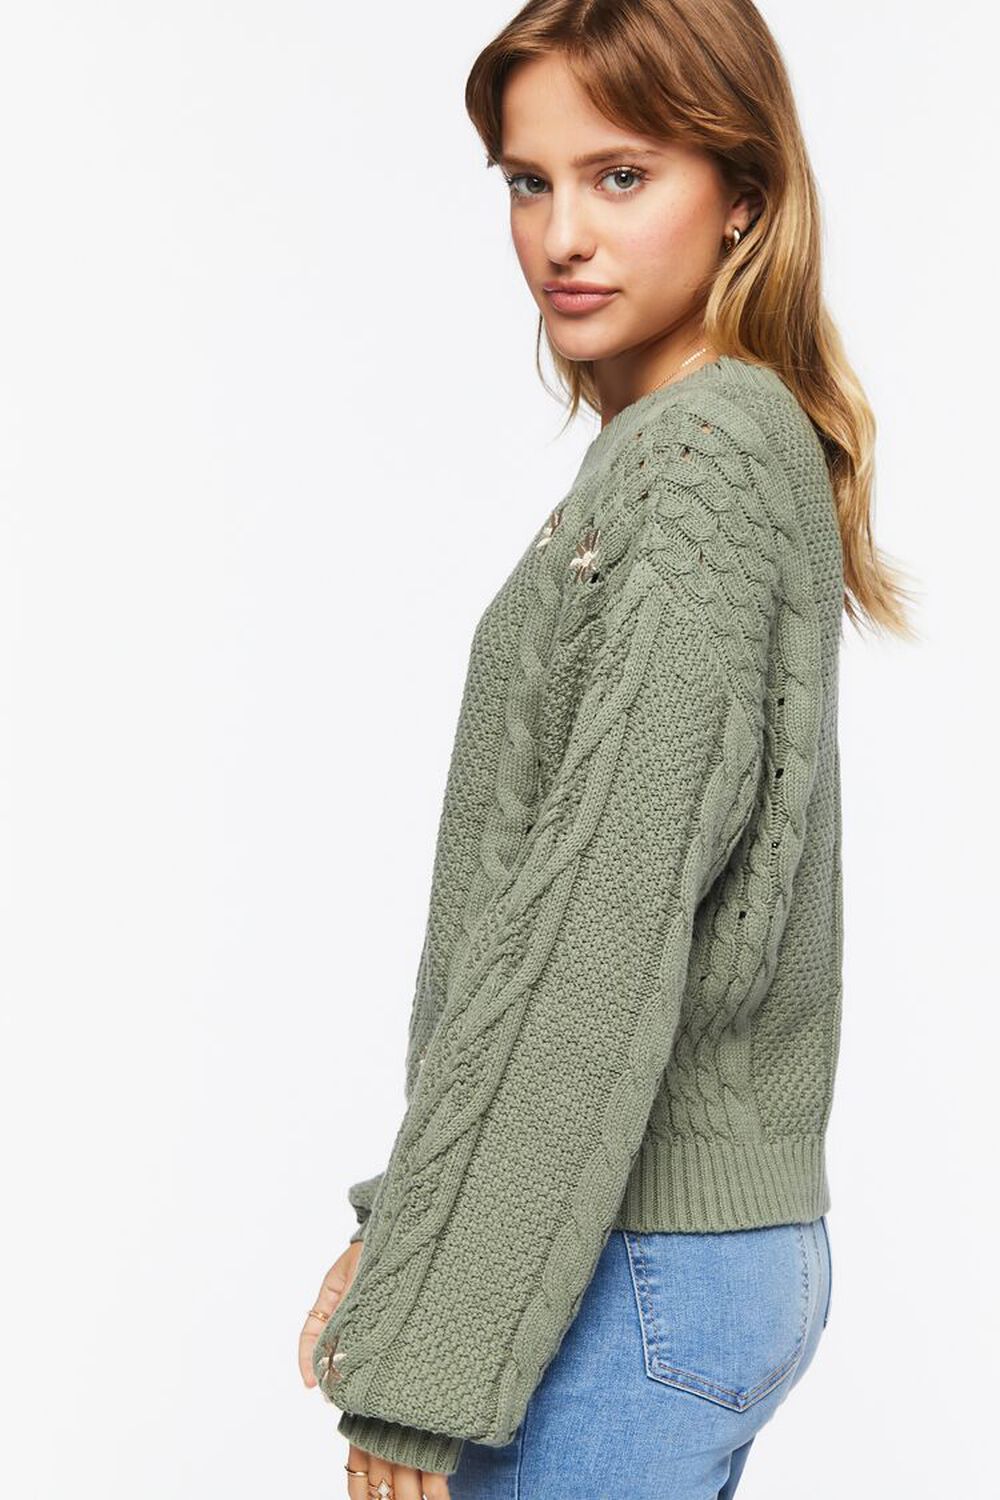 GREEN/TAN Embroidered Floral Cable Knit Sweater, image 3